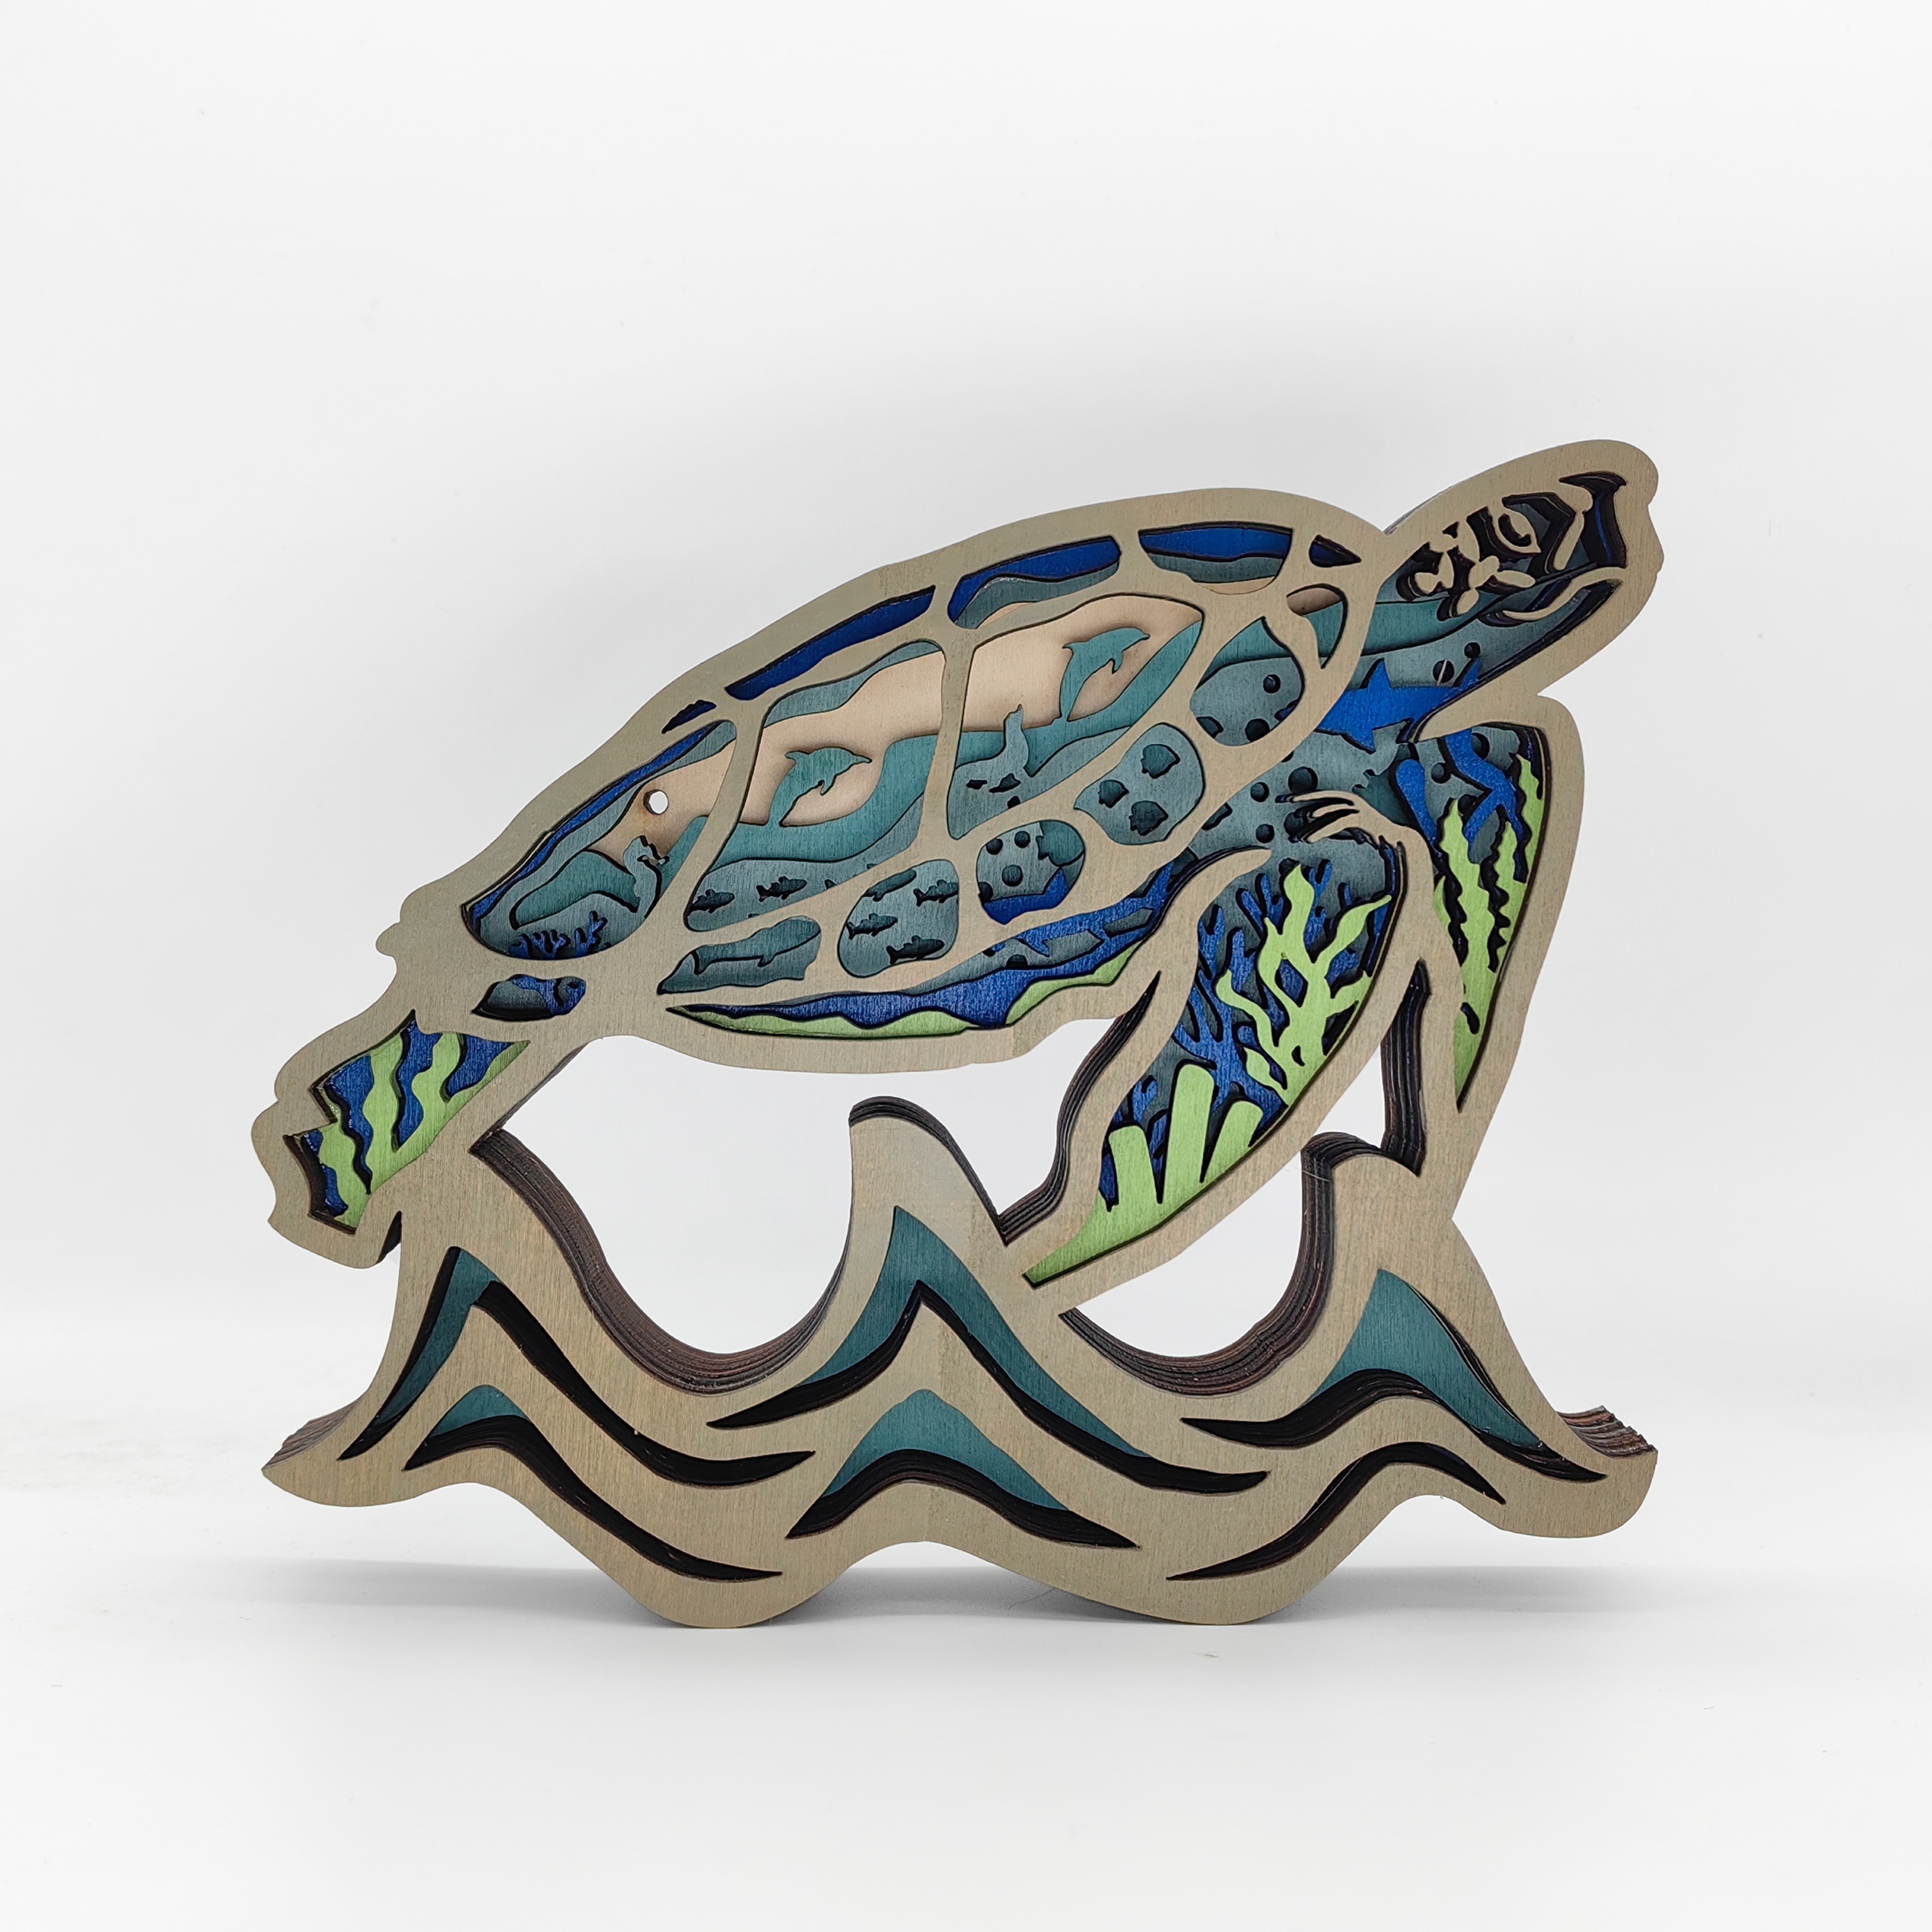 

1pc Handcrafted Wooden Sea Turtle Sculpture - Ocean-inspired Desk Decor, Artistic Home & Office Accent